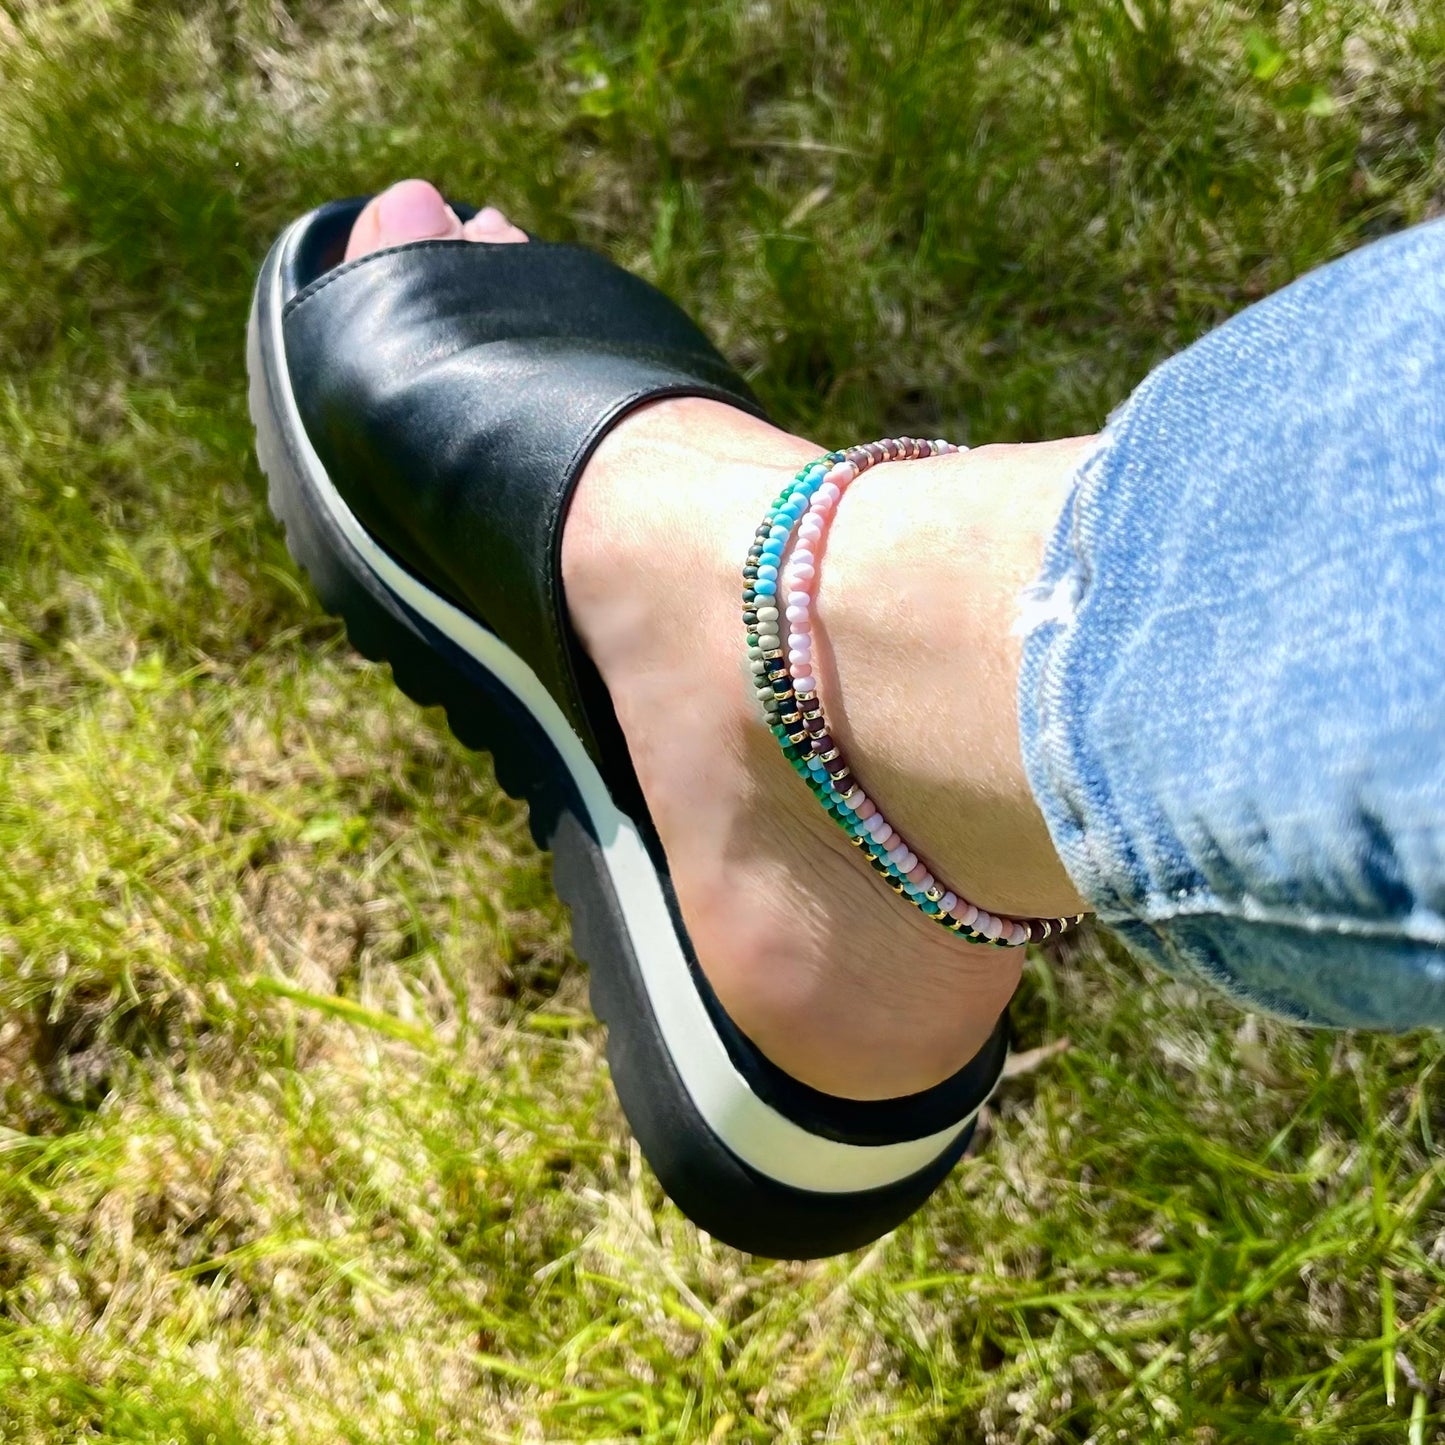 Women's anklets with colorful seed beads on stretchy elastic. Cheerful, boho beaded ankle bracelets.